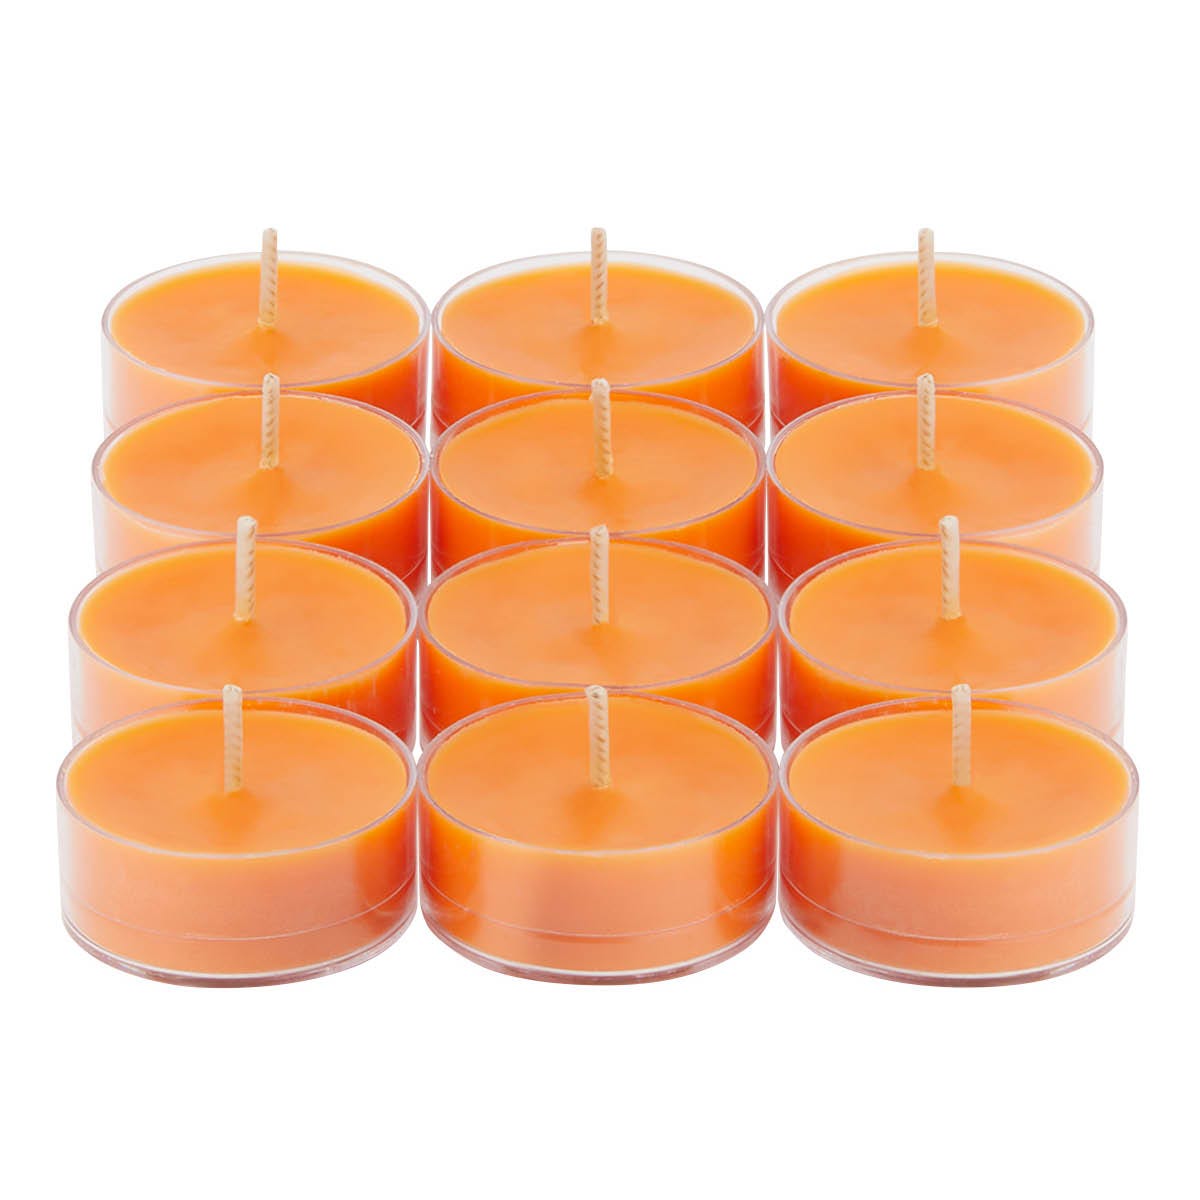 Apricot Peach Preserve Universal Tealight® Candles - PartyLite US